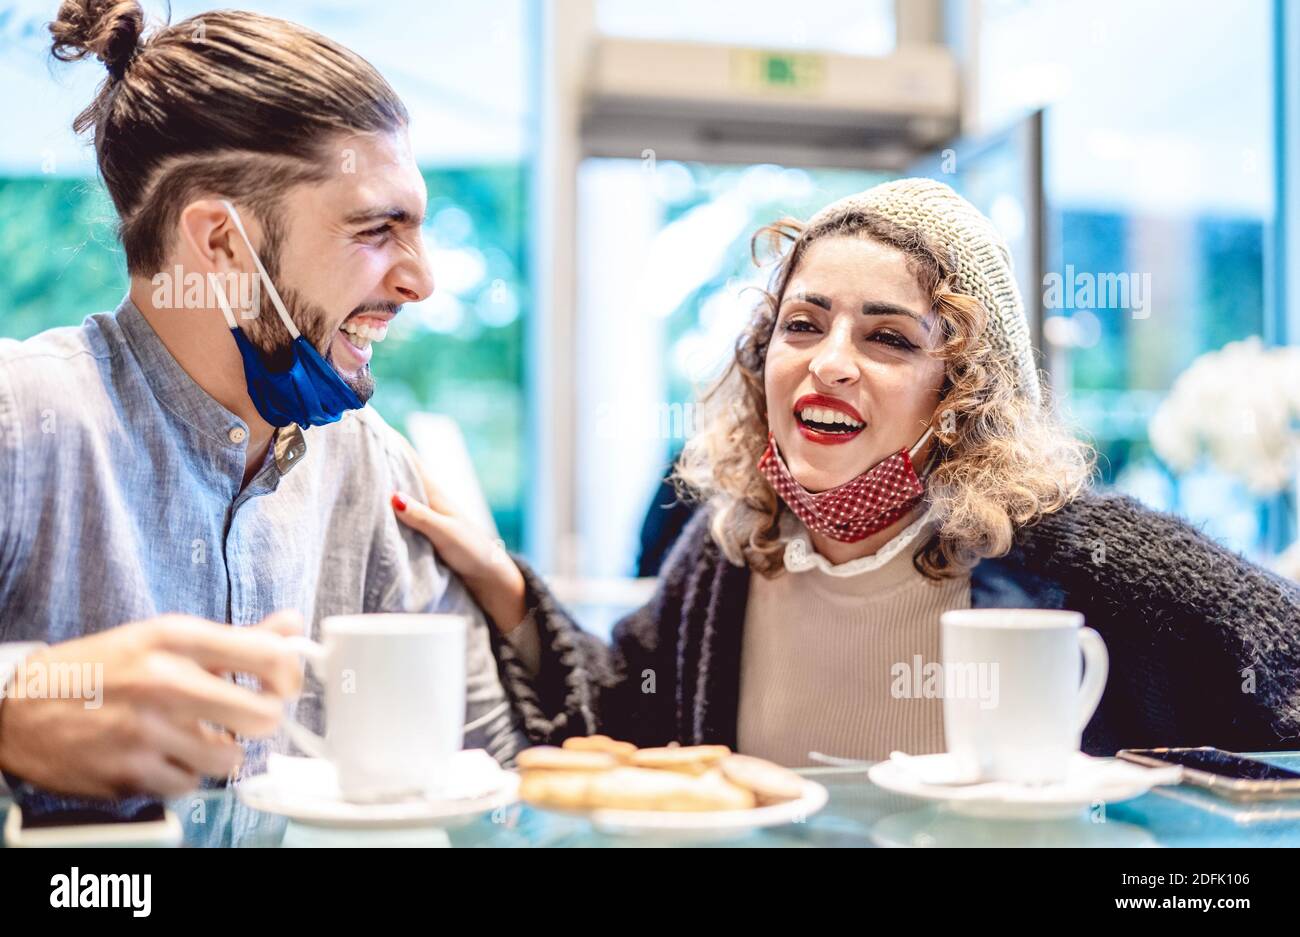 Happy couple wearing face mask having fun together at bar cafeteria - New normal lifestyle concept with young people on positive mood Stock Photo